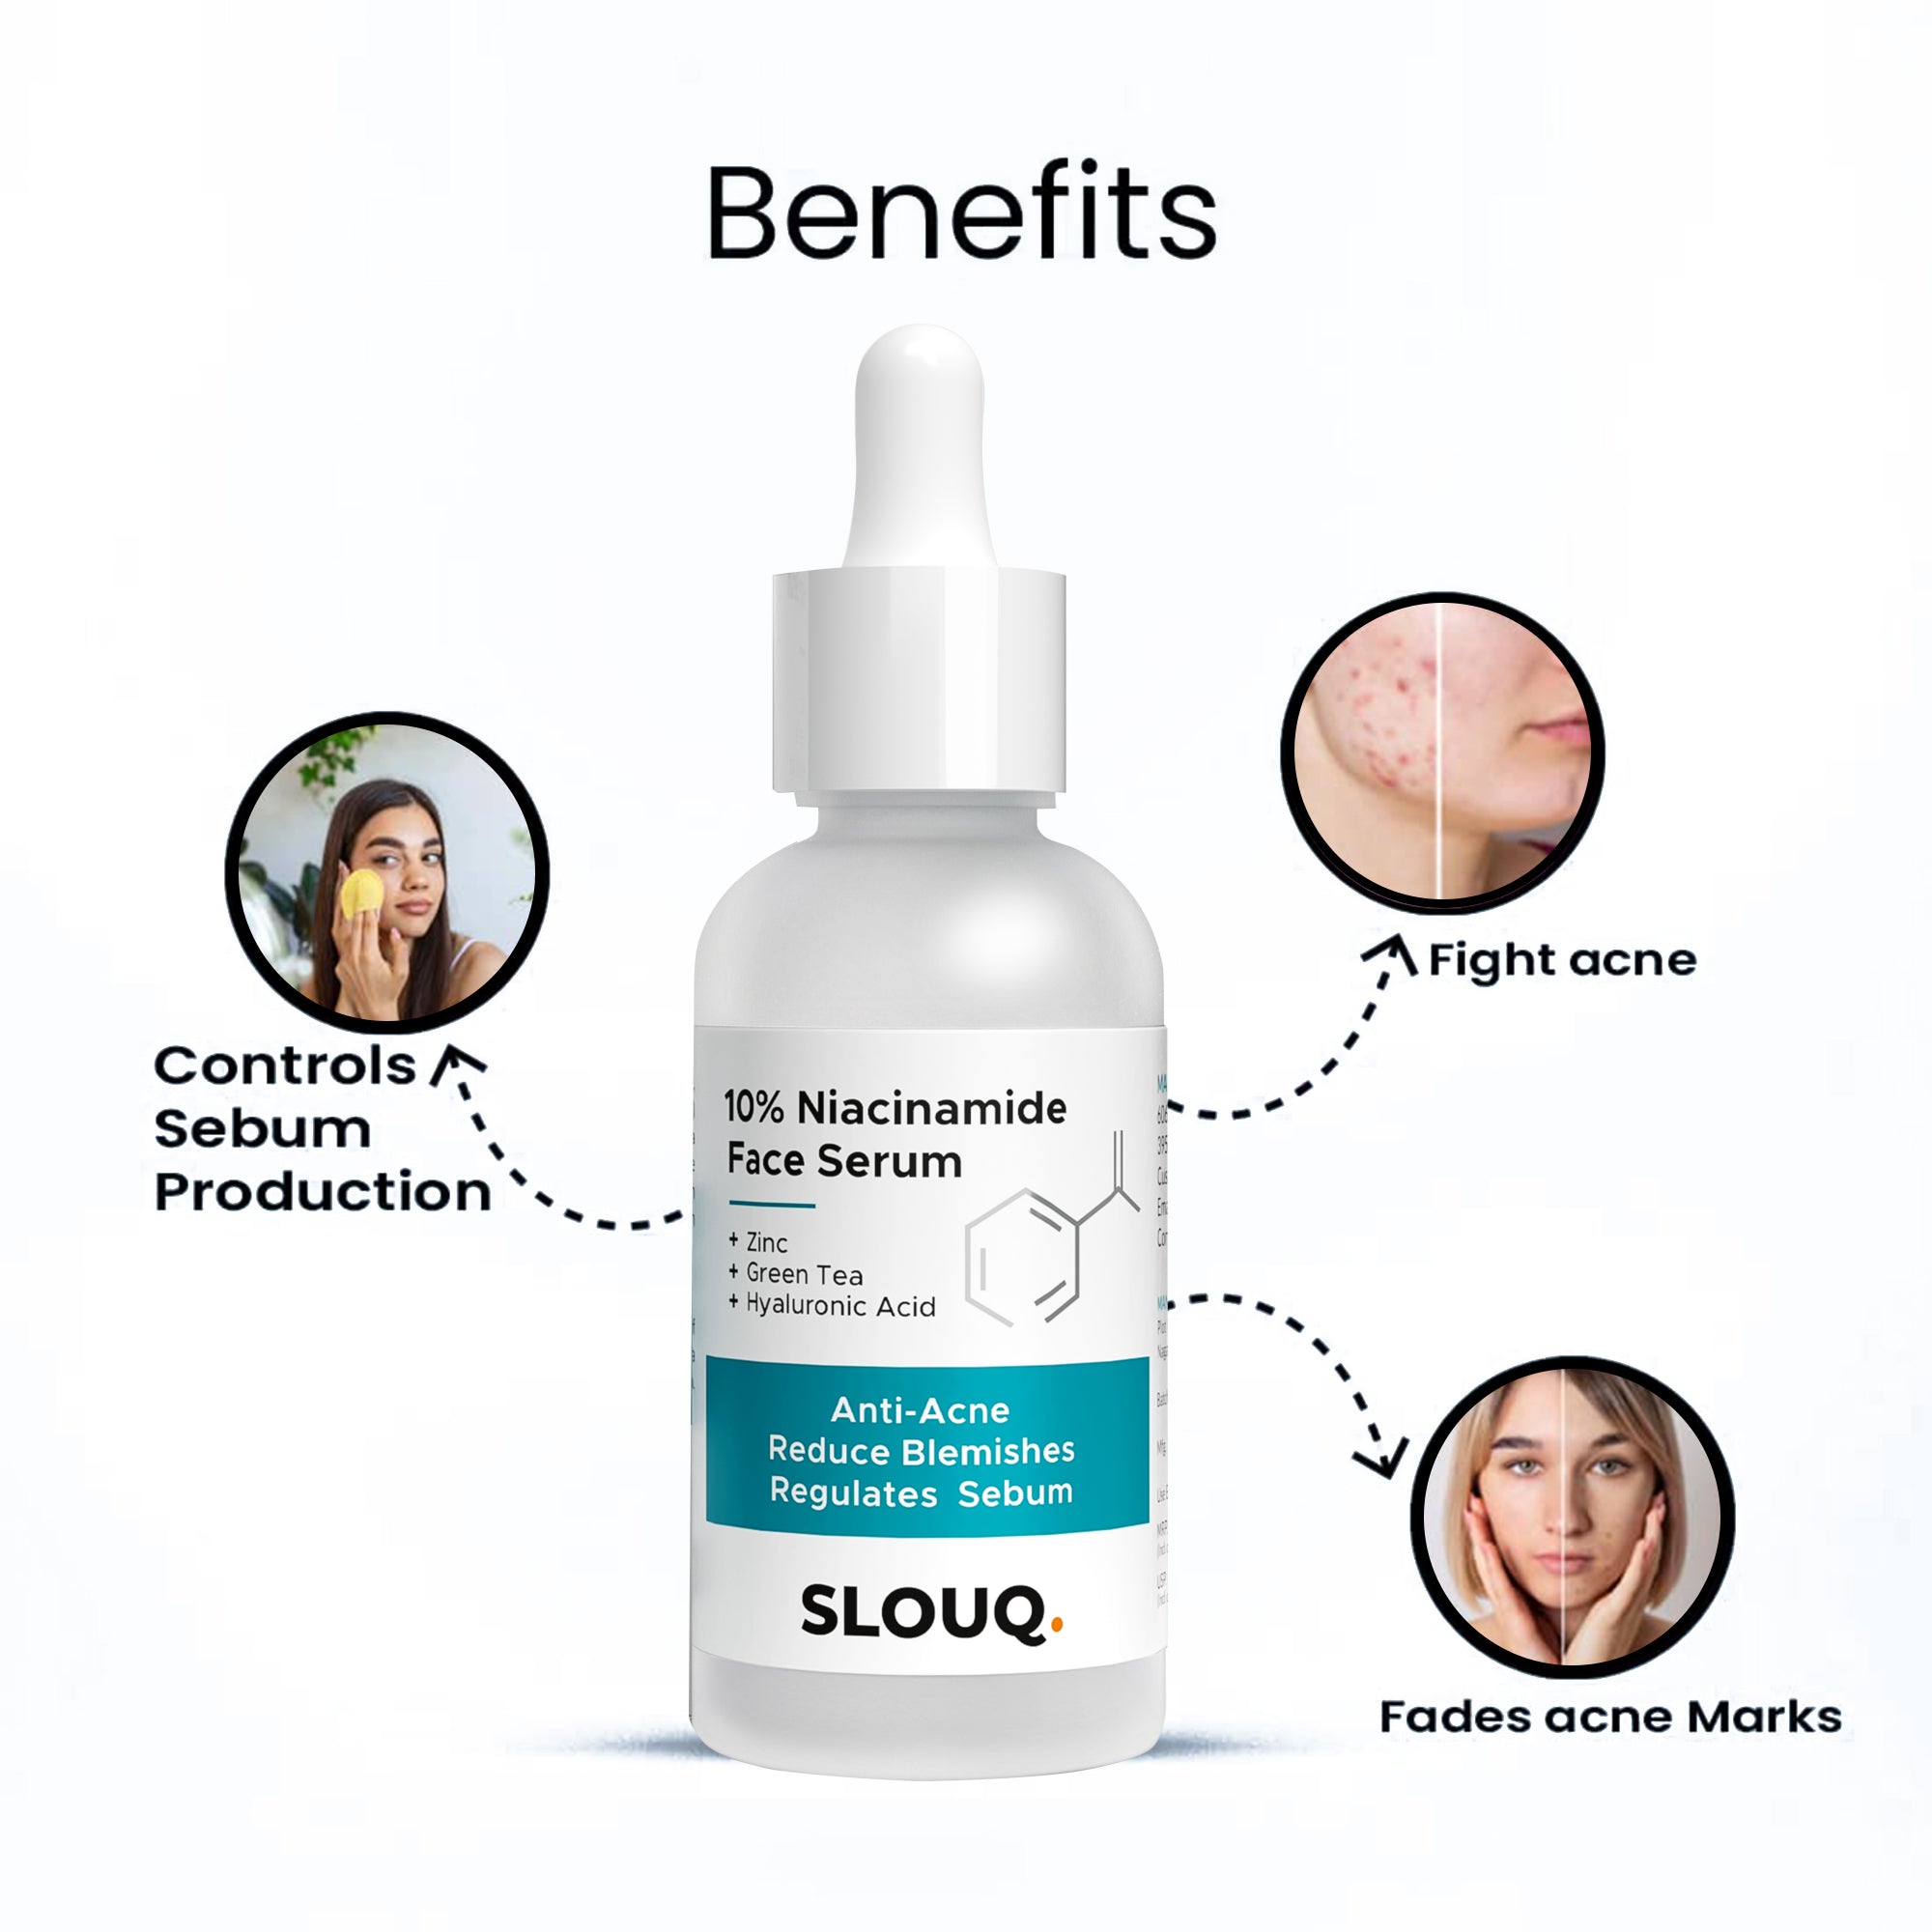 Slouq 10% Niacinamide Face Serum with Zinc - Reduces Acne Marks &amp; Dark Spots - Skin Clarifying Anti Acne Serum for Oily &amp; Acne Prone Skin - 30ml